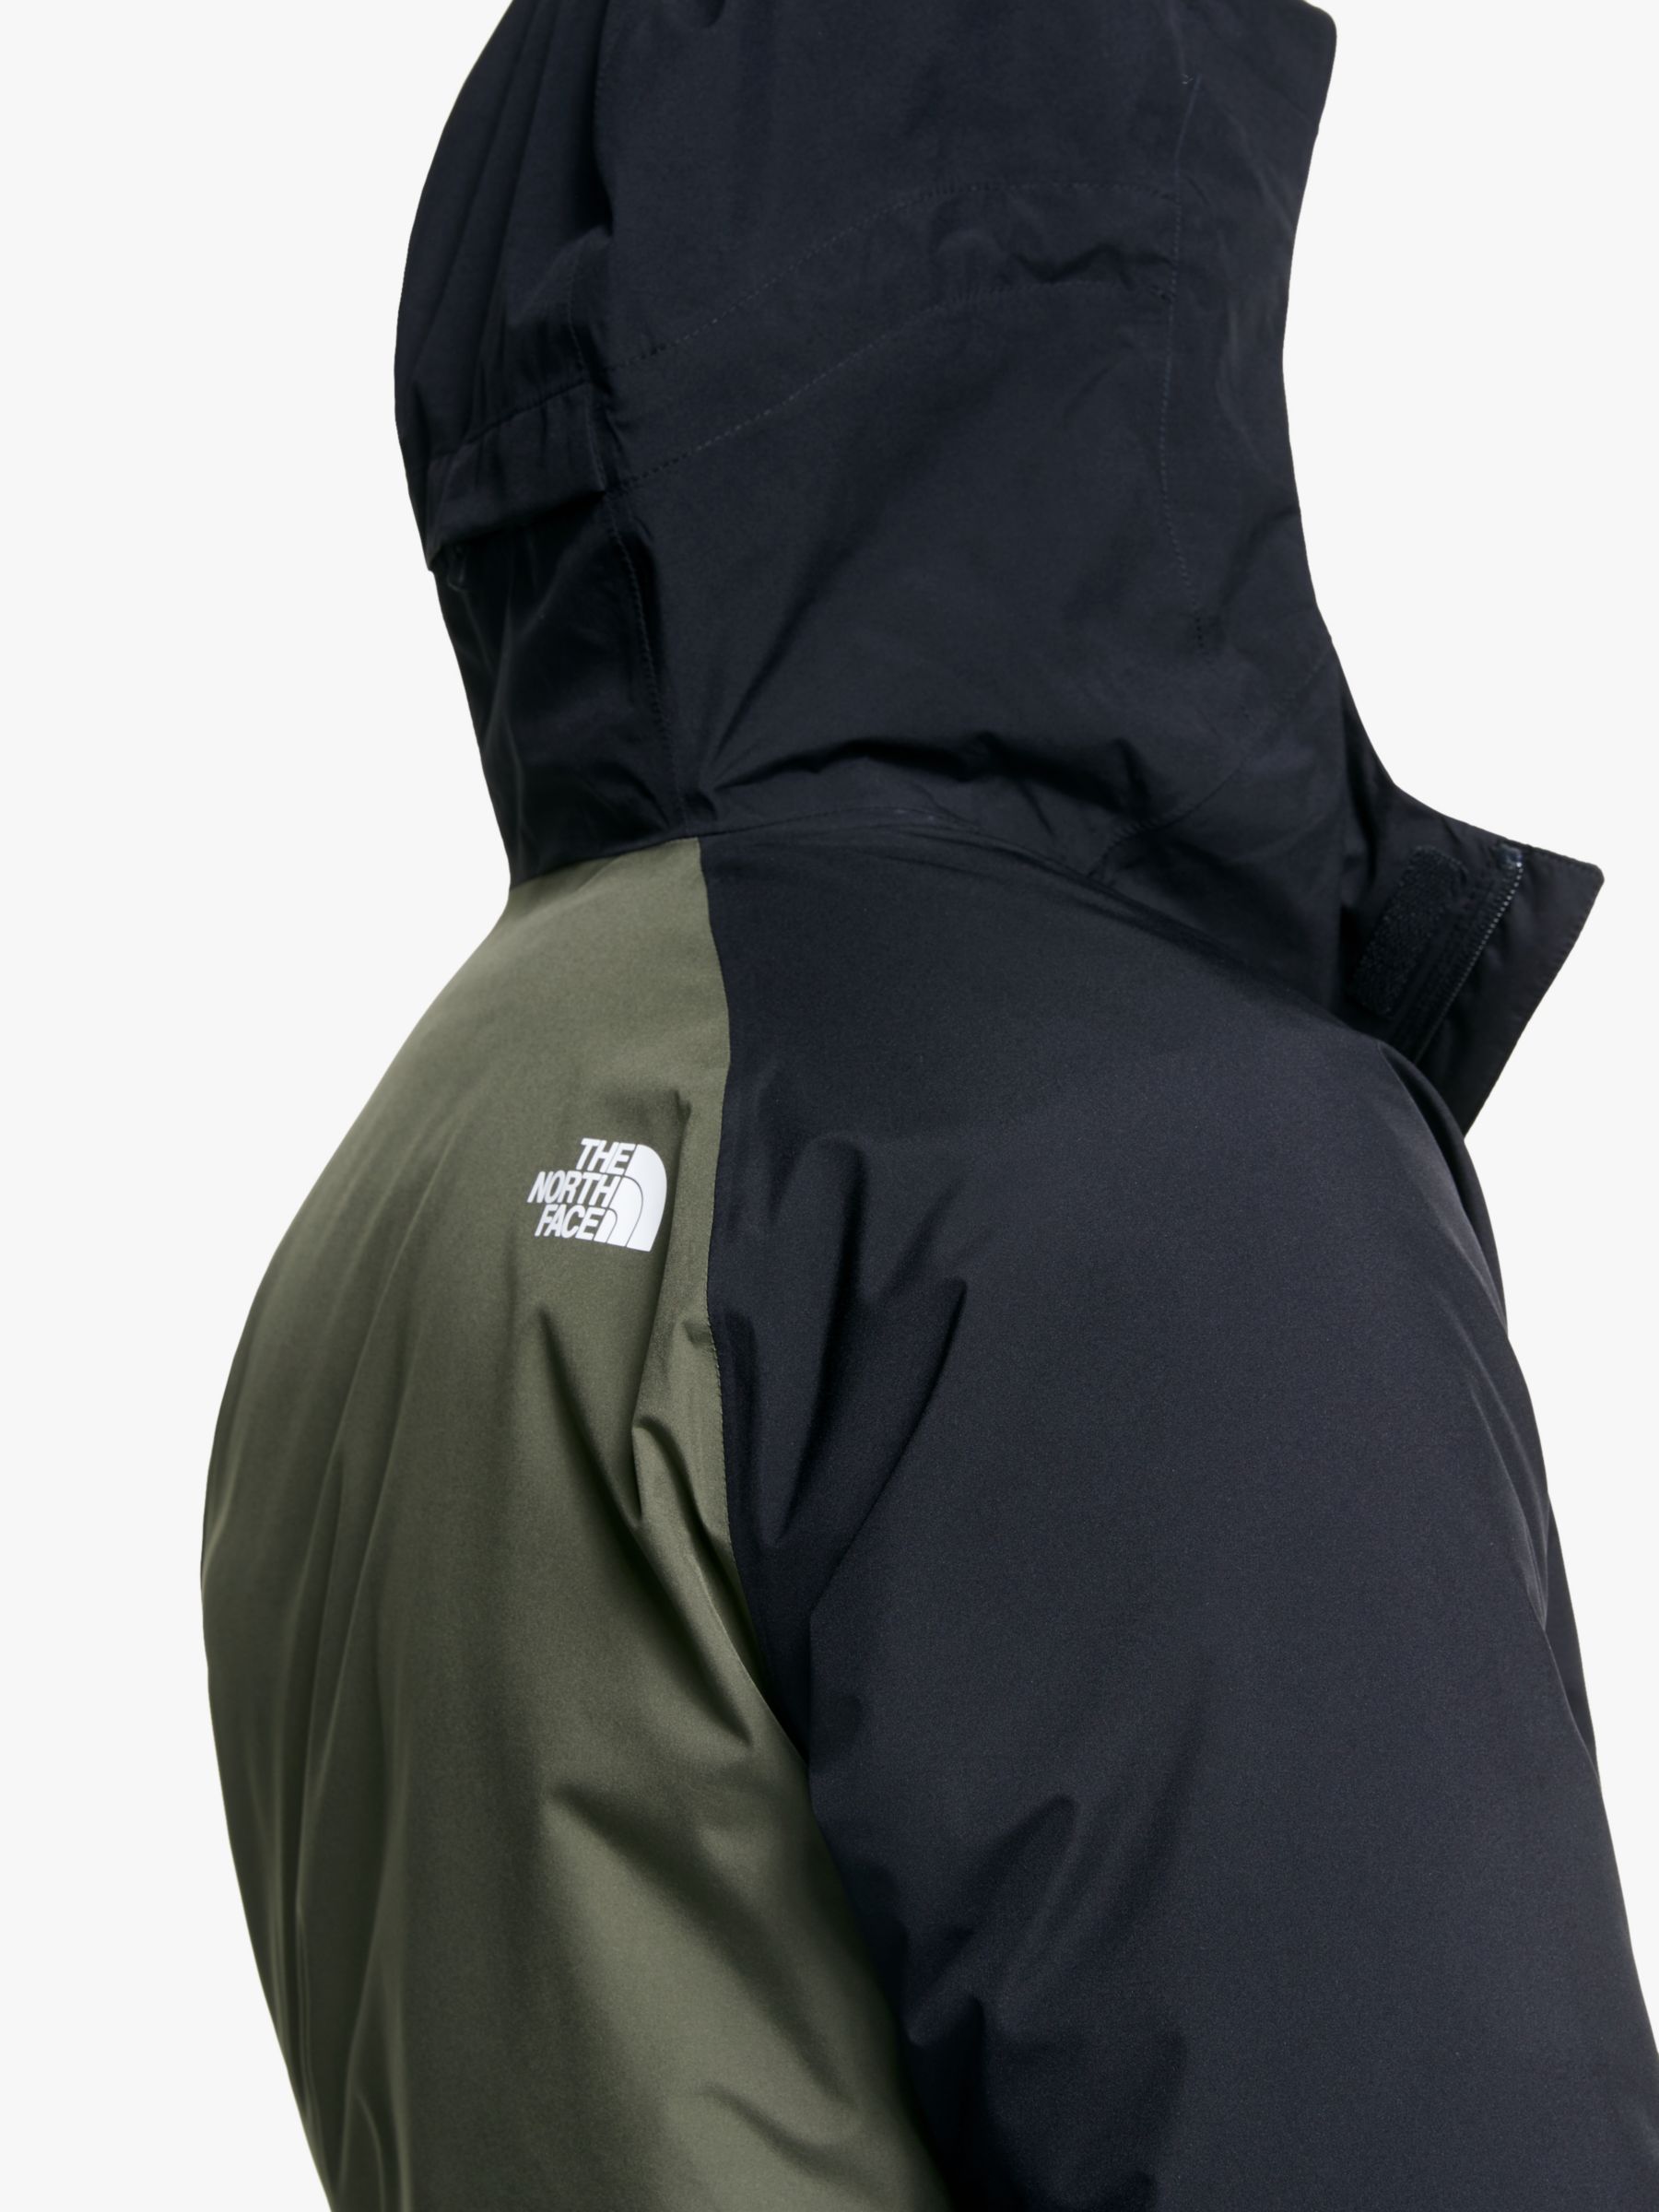 new north face material